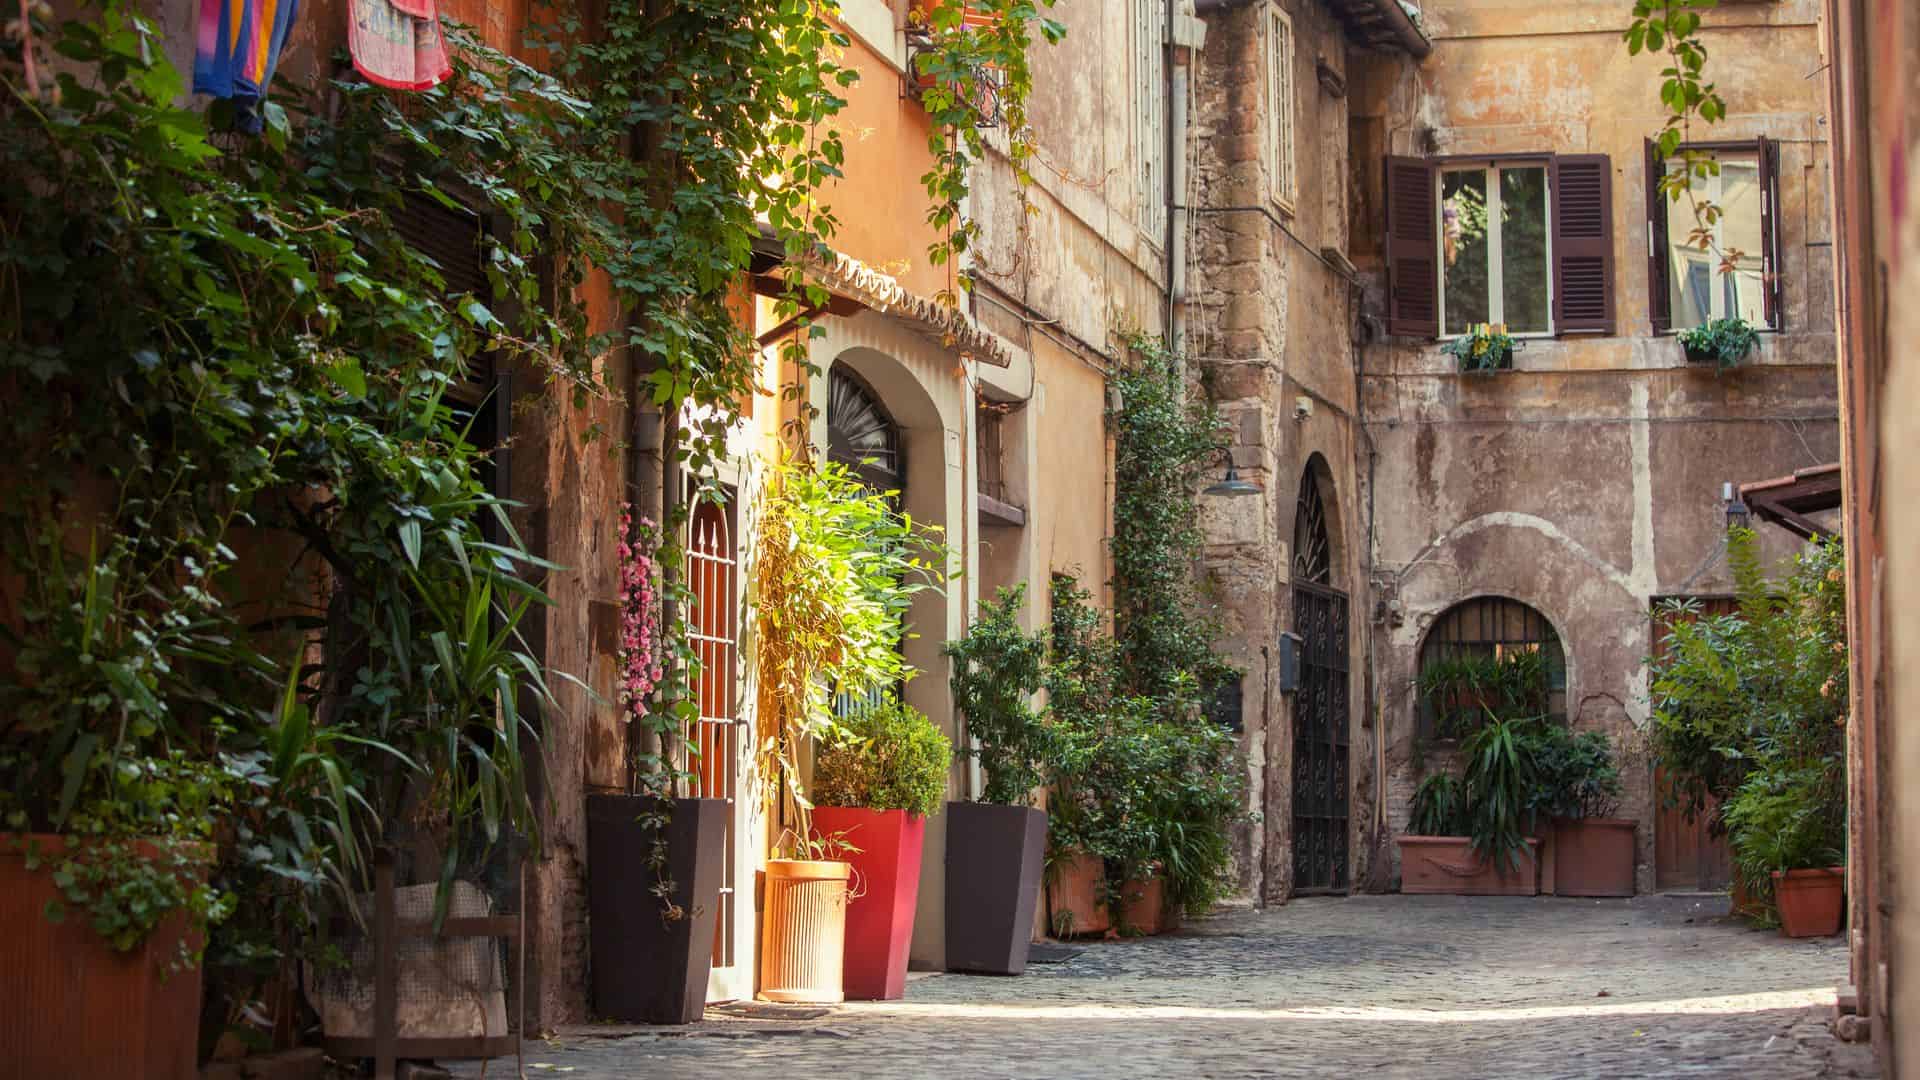 A view of a beautiful plant-filled street in the Trastevere district.